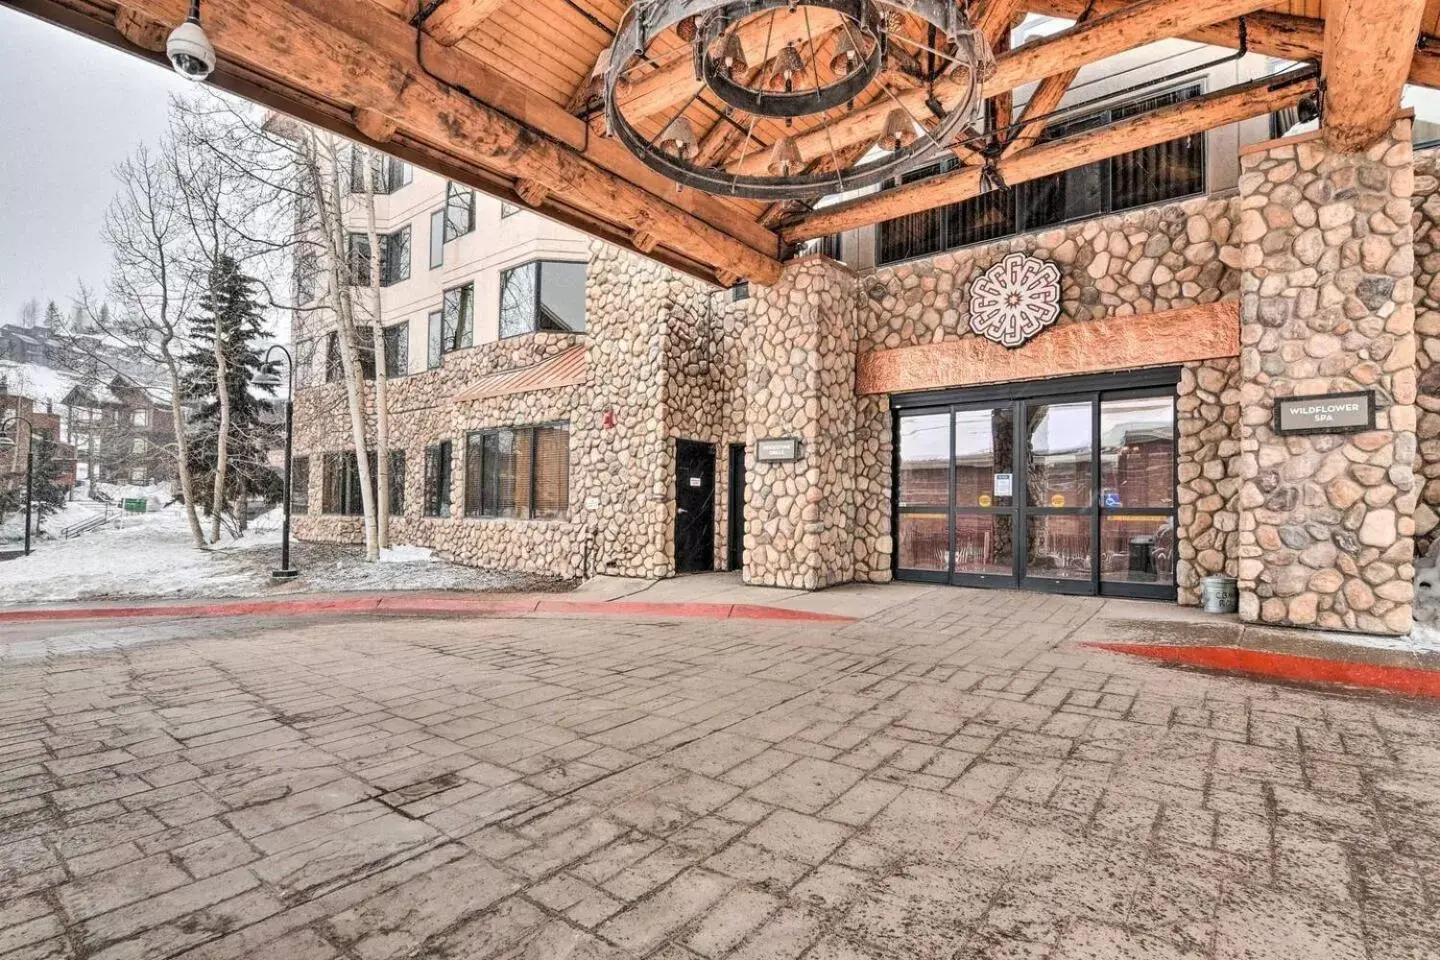 Property building in Grand Lodge Crested Butte